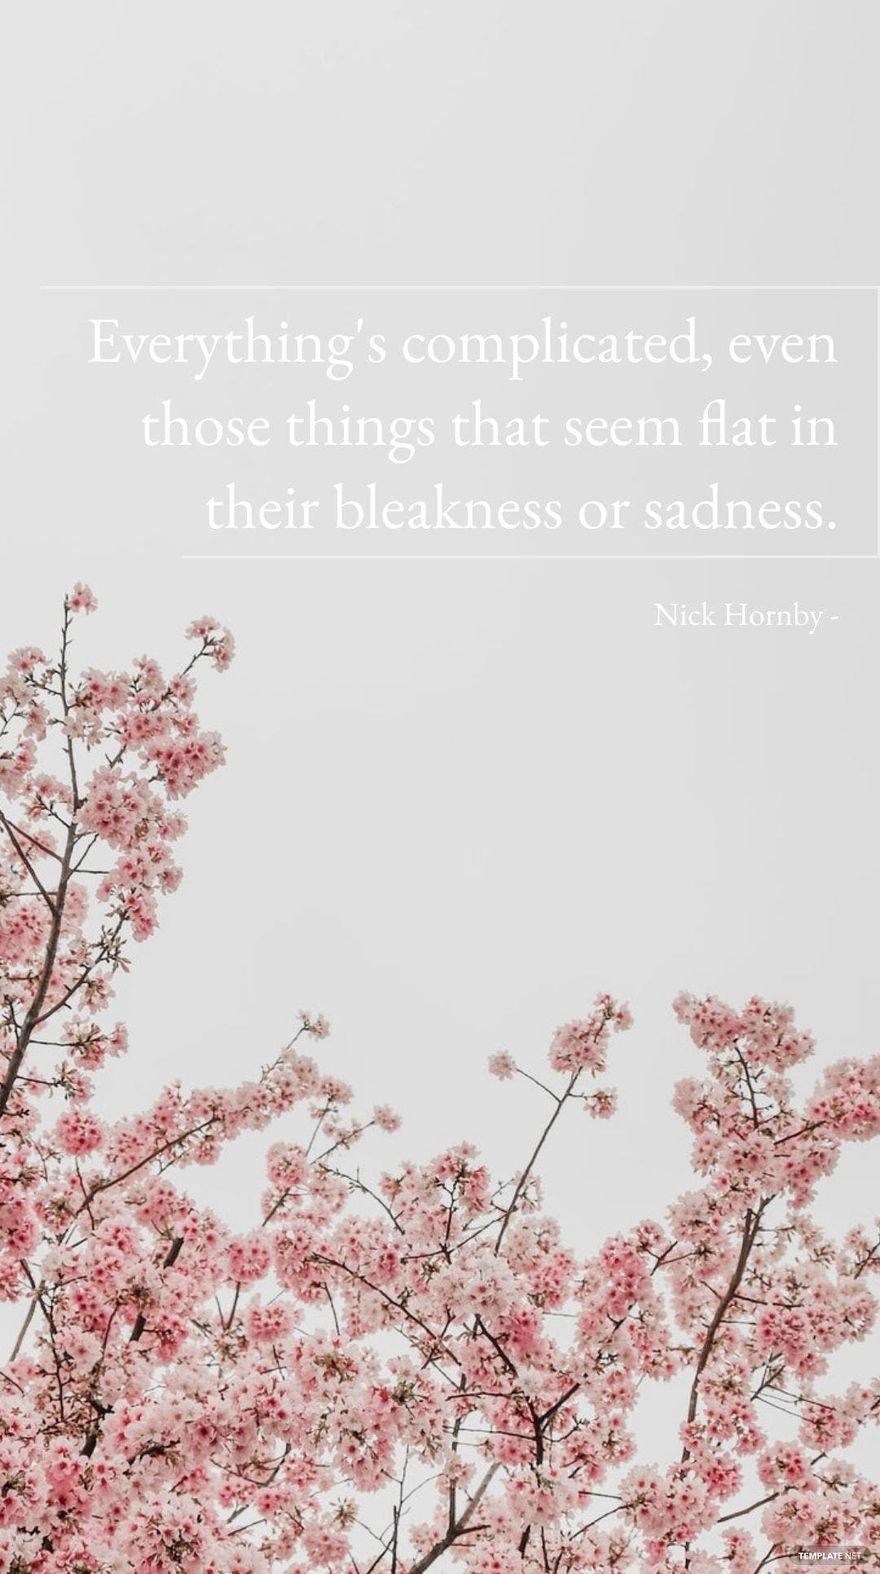 Nick Hornby - Everything's complicated, even those things that seem flat in their bleakness or sadness.